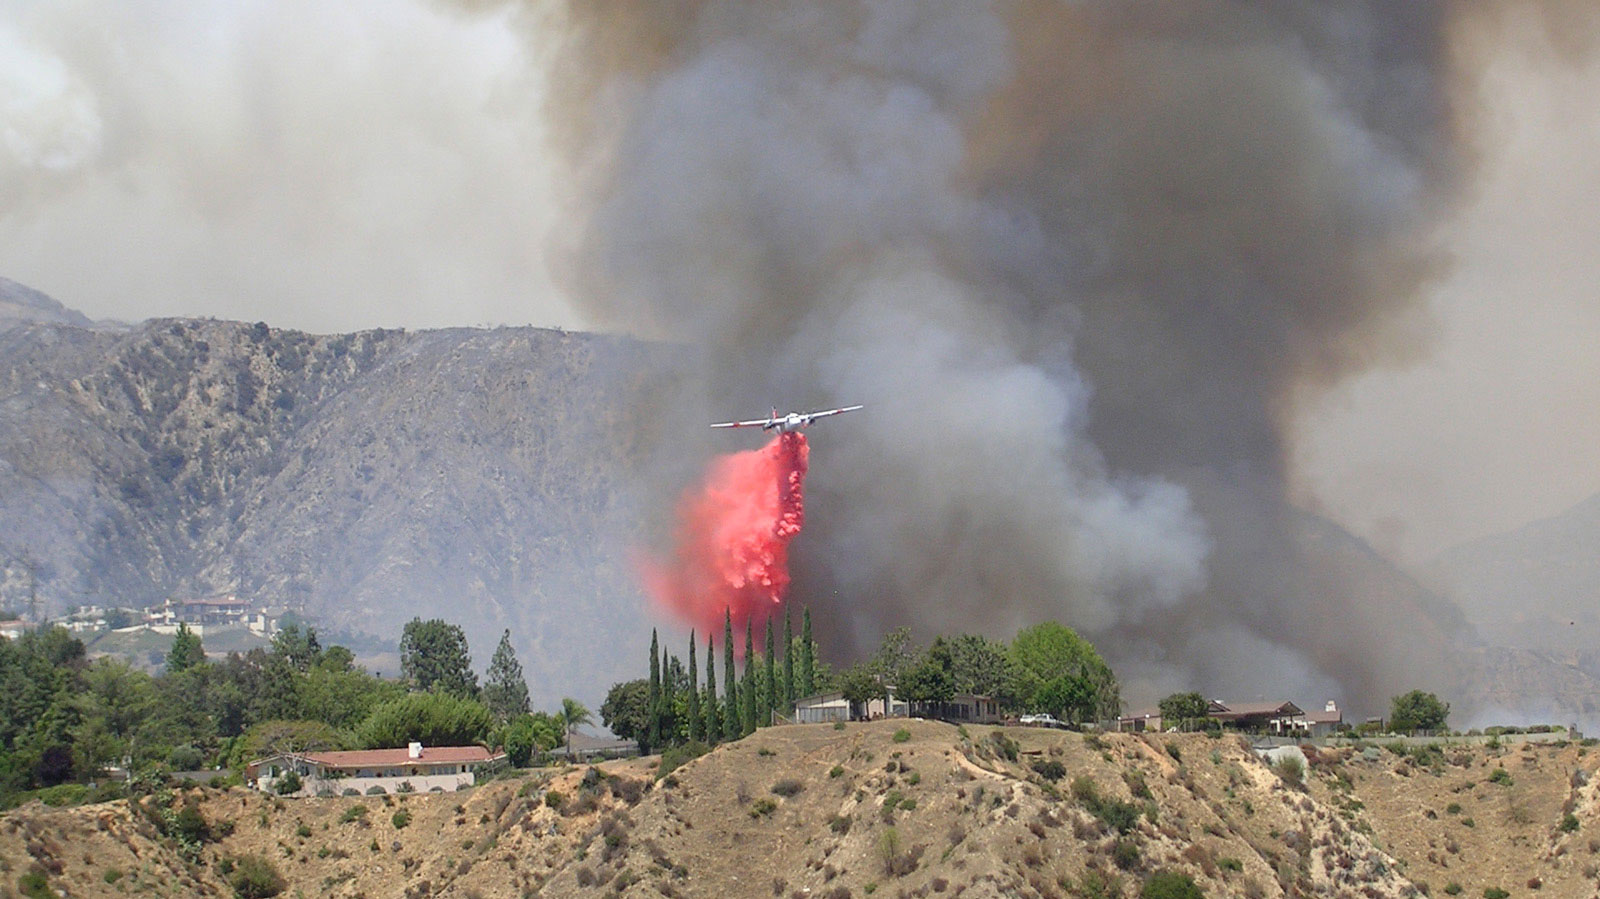 The 2009 Station Fire in Southern California was an example of a summer fire not driven by Santa Ana winds.